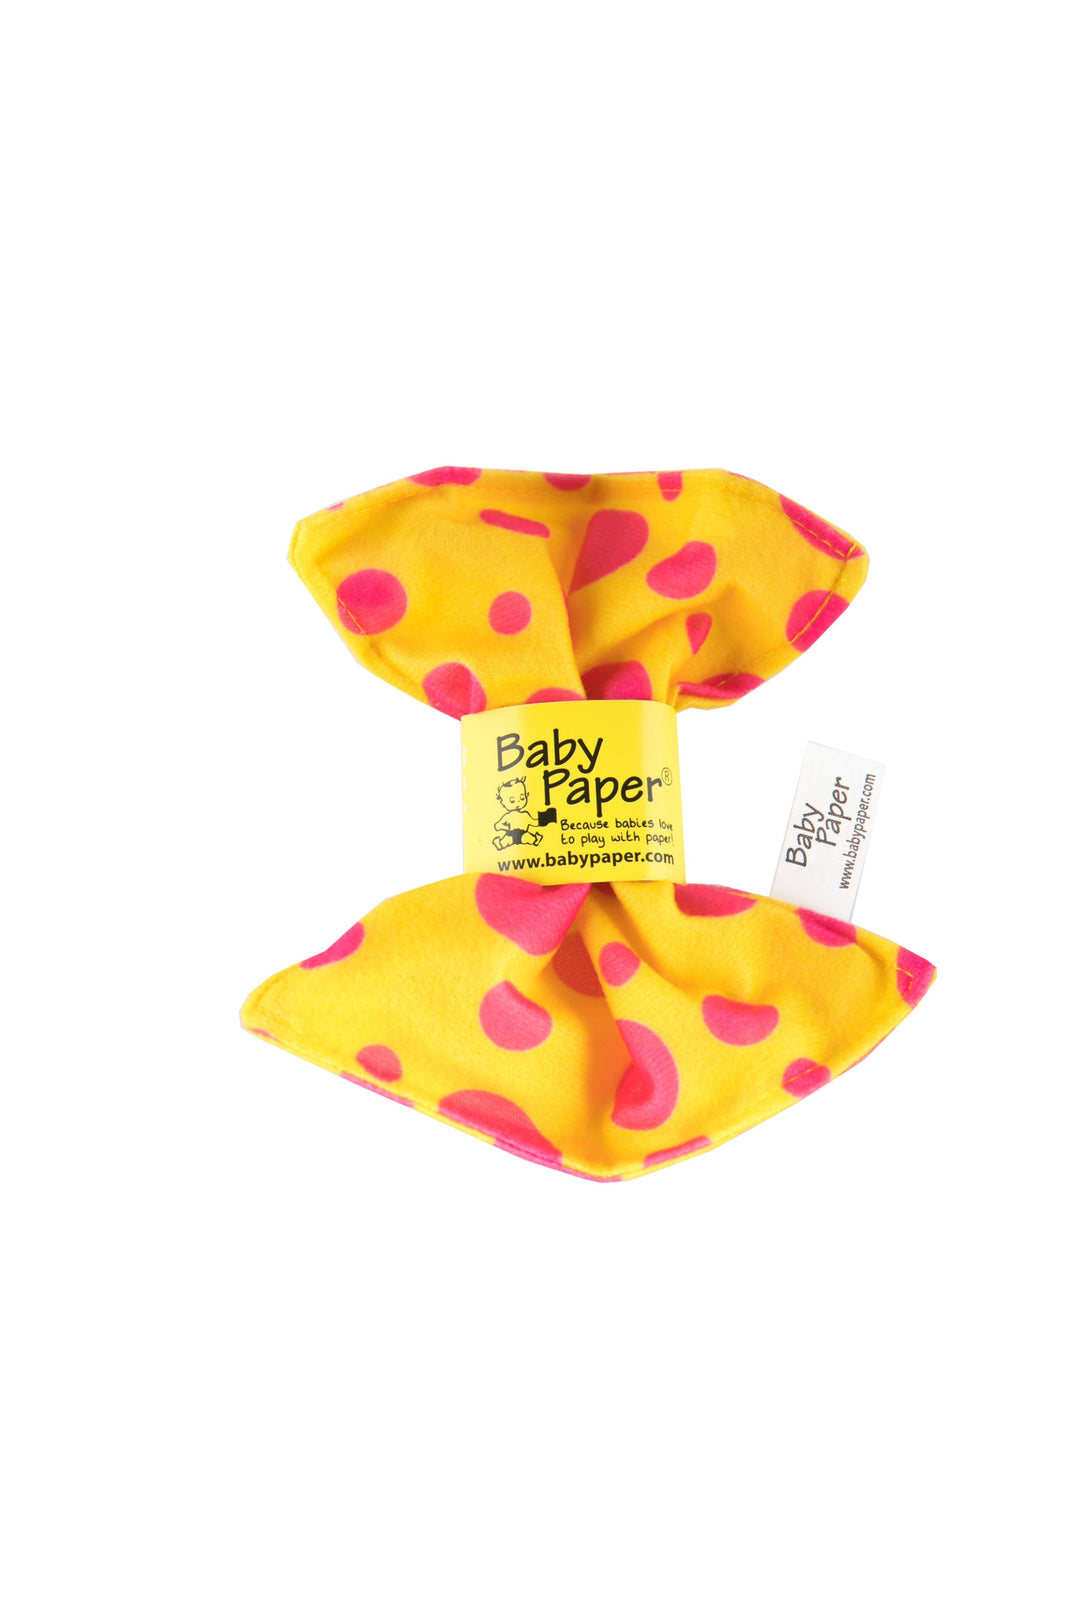 BABY PAPER - Yellow With Pink Dots Baby Paper